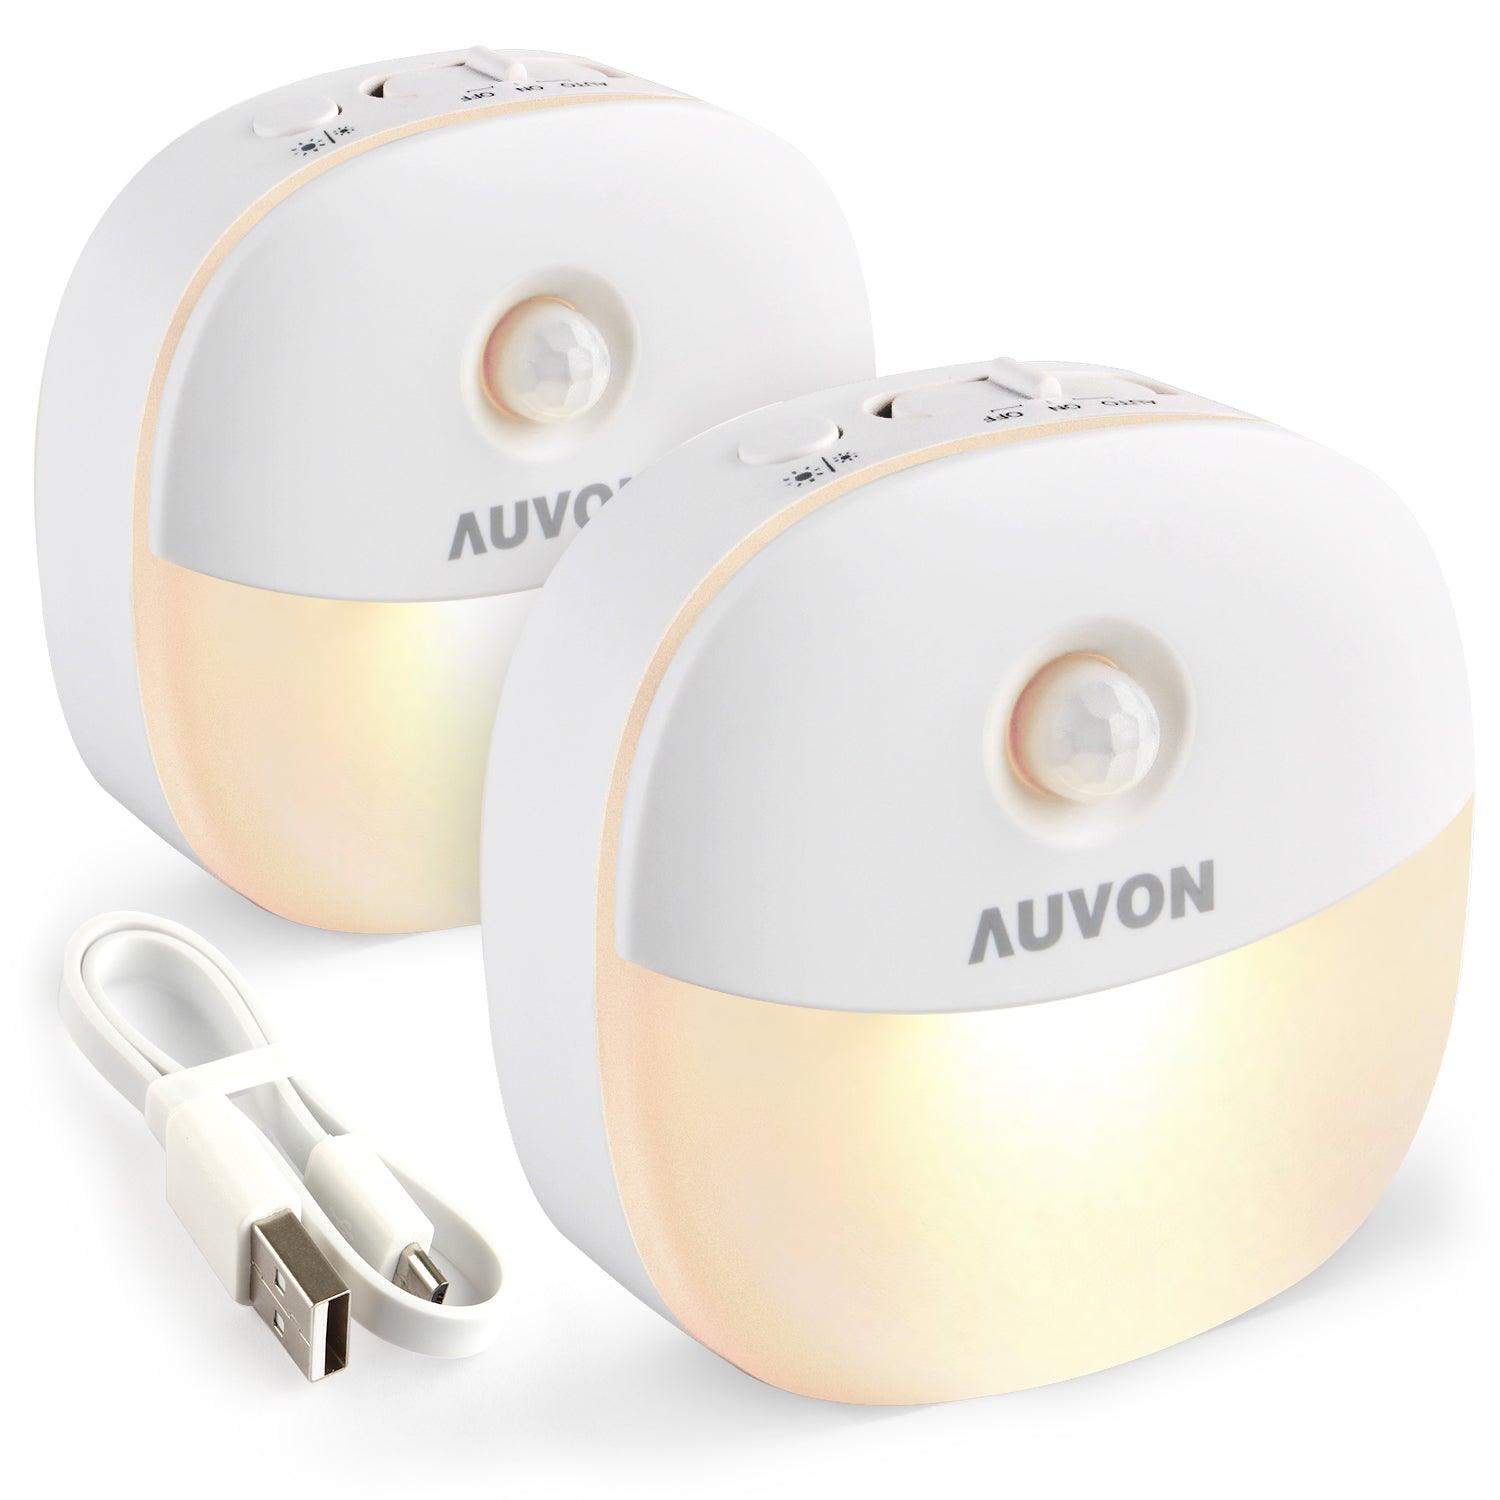 AUVON Rechargeable Mini Motion Sensor Night Light, Warm White LED Stick-On Closet Light with Dusk to Dawn Sensor, Adjustable Brightness for Wall, Stairs, Cabinet, Hallway (2 Pack) - AUVON